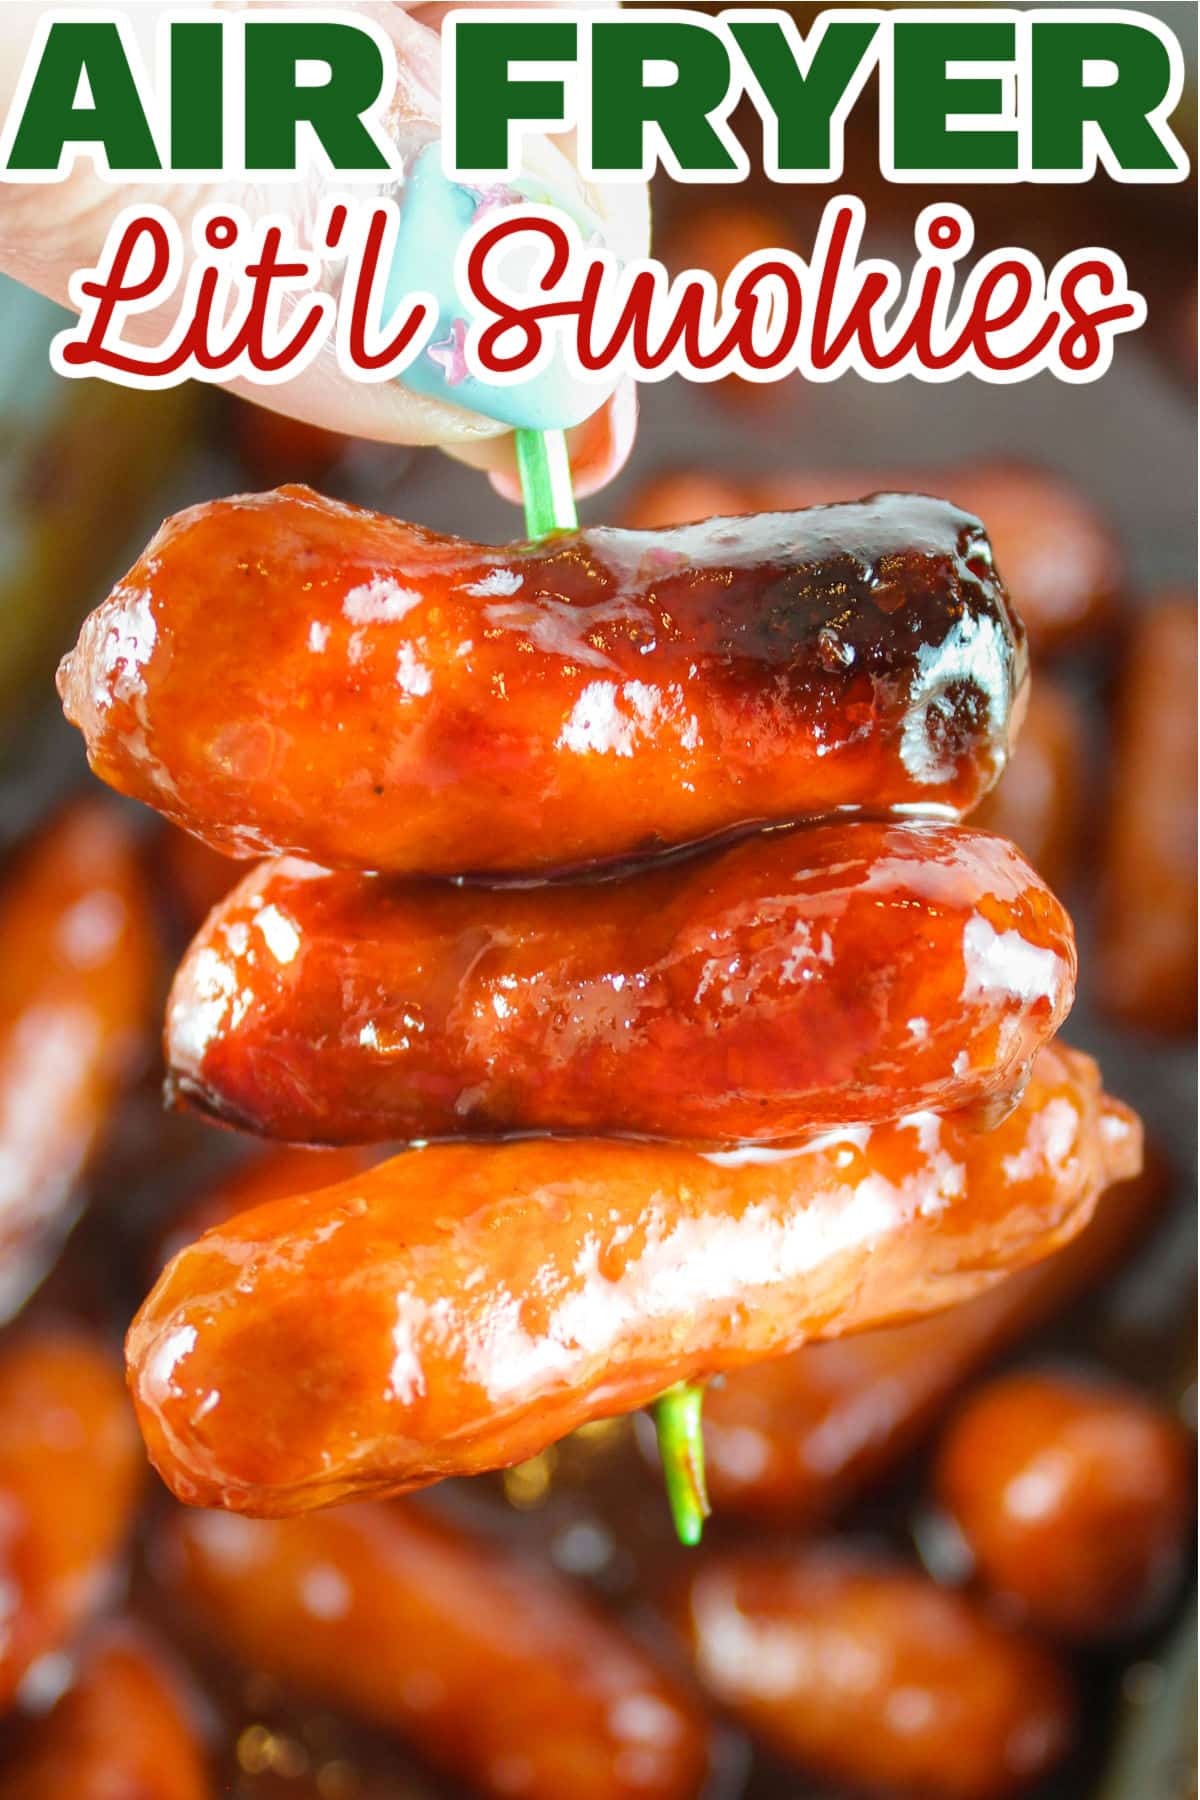 Making Lil Smokies in the Air Fryer is a delicious and quick appetizer! Mixing together a quick sauce - yes - with grape jelly - serves as a delicious dipping sauce as well. No need to crock pot these for hours - you'll have a delicious appetizer in just 15 minutes! Perfection! via @foodhussy